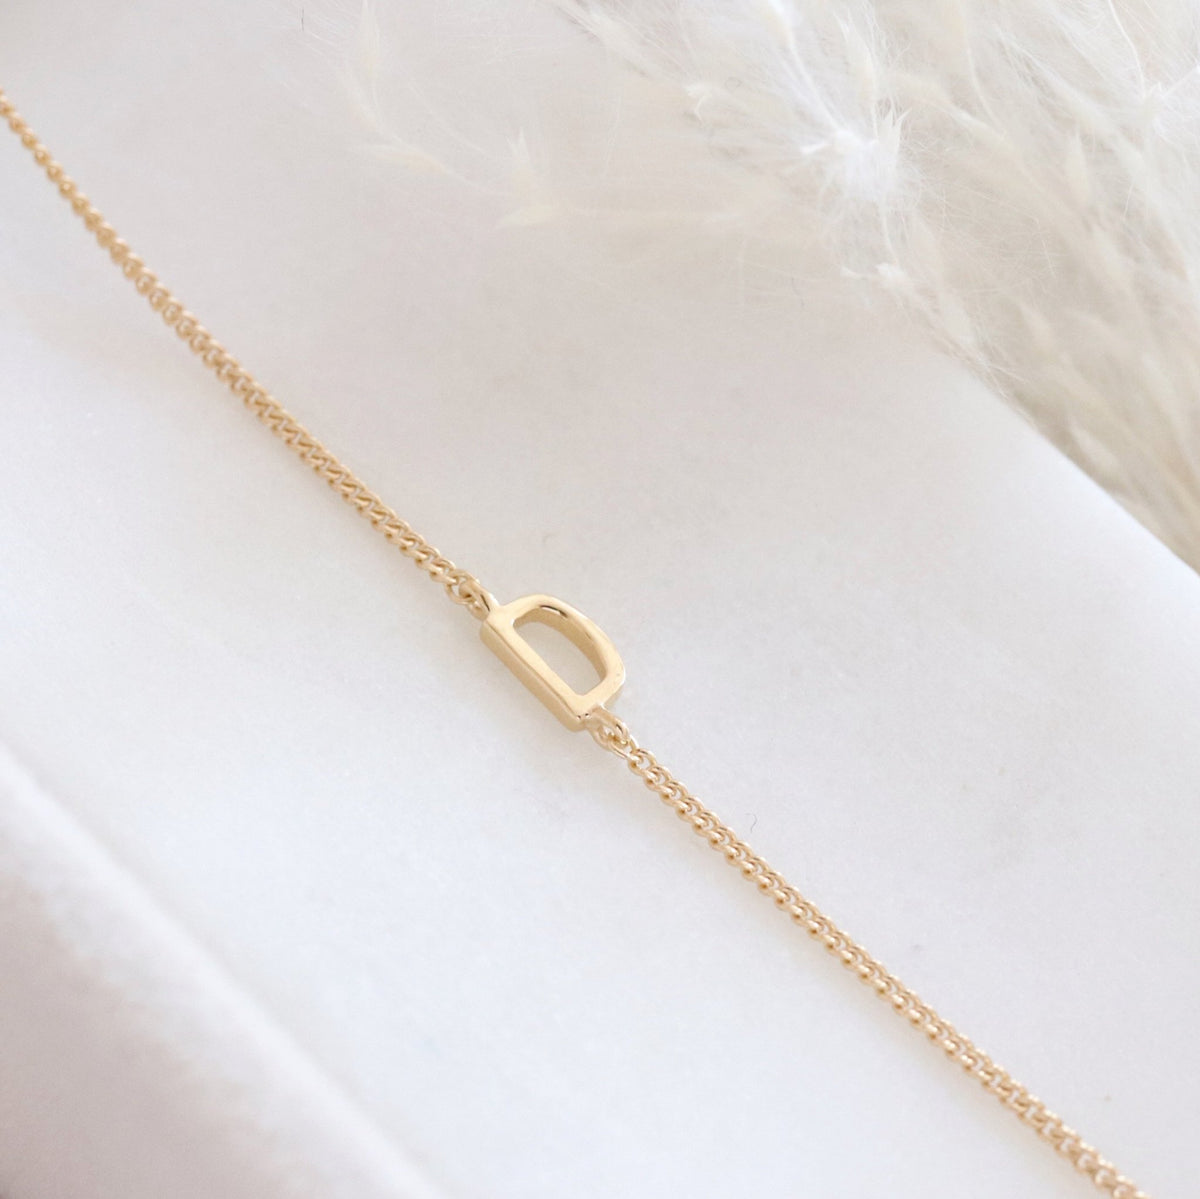 NOTABLE OFFSET INITIAL NECKLACE - D - GOLD - SO PRETTY CARA COTTER